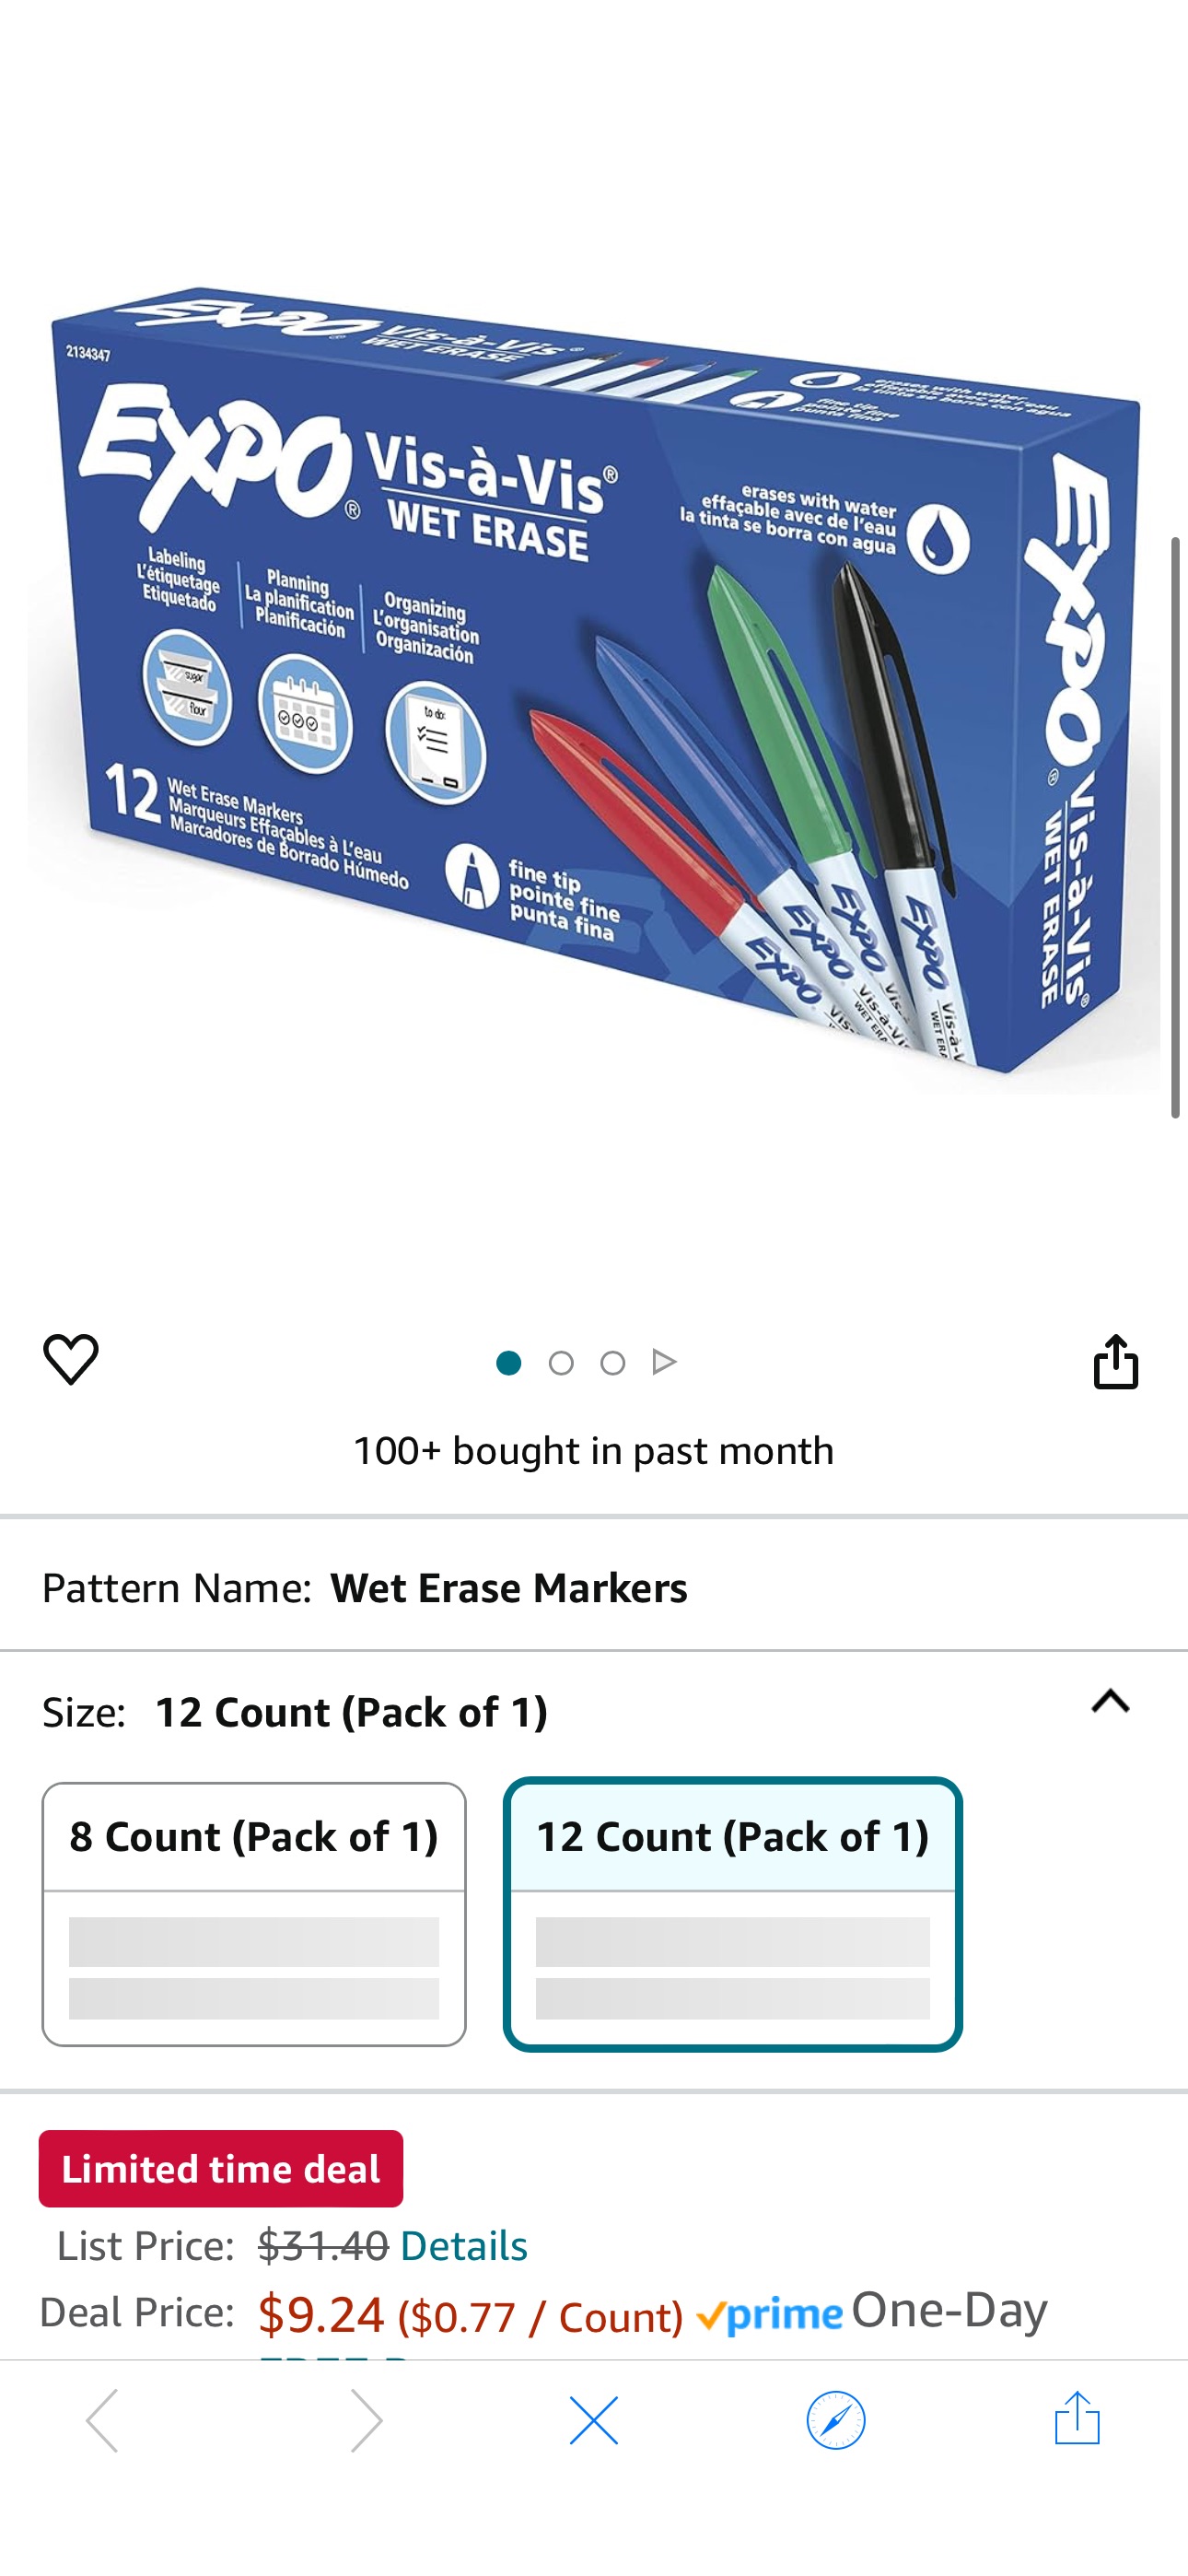 Amazon.com : EXPO Vis-a-Vis Wet Erase Markers, Fine Point, Assorted Colors, 12 Count : Office Products